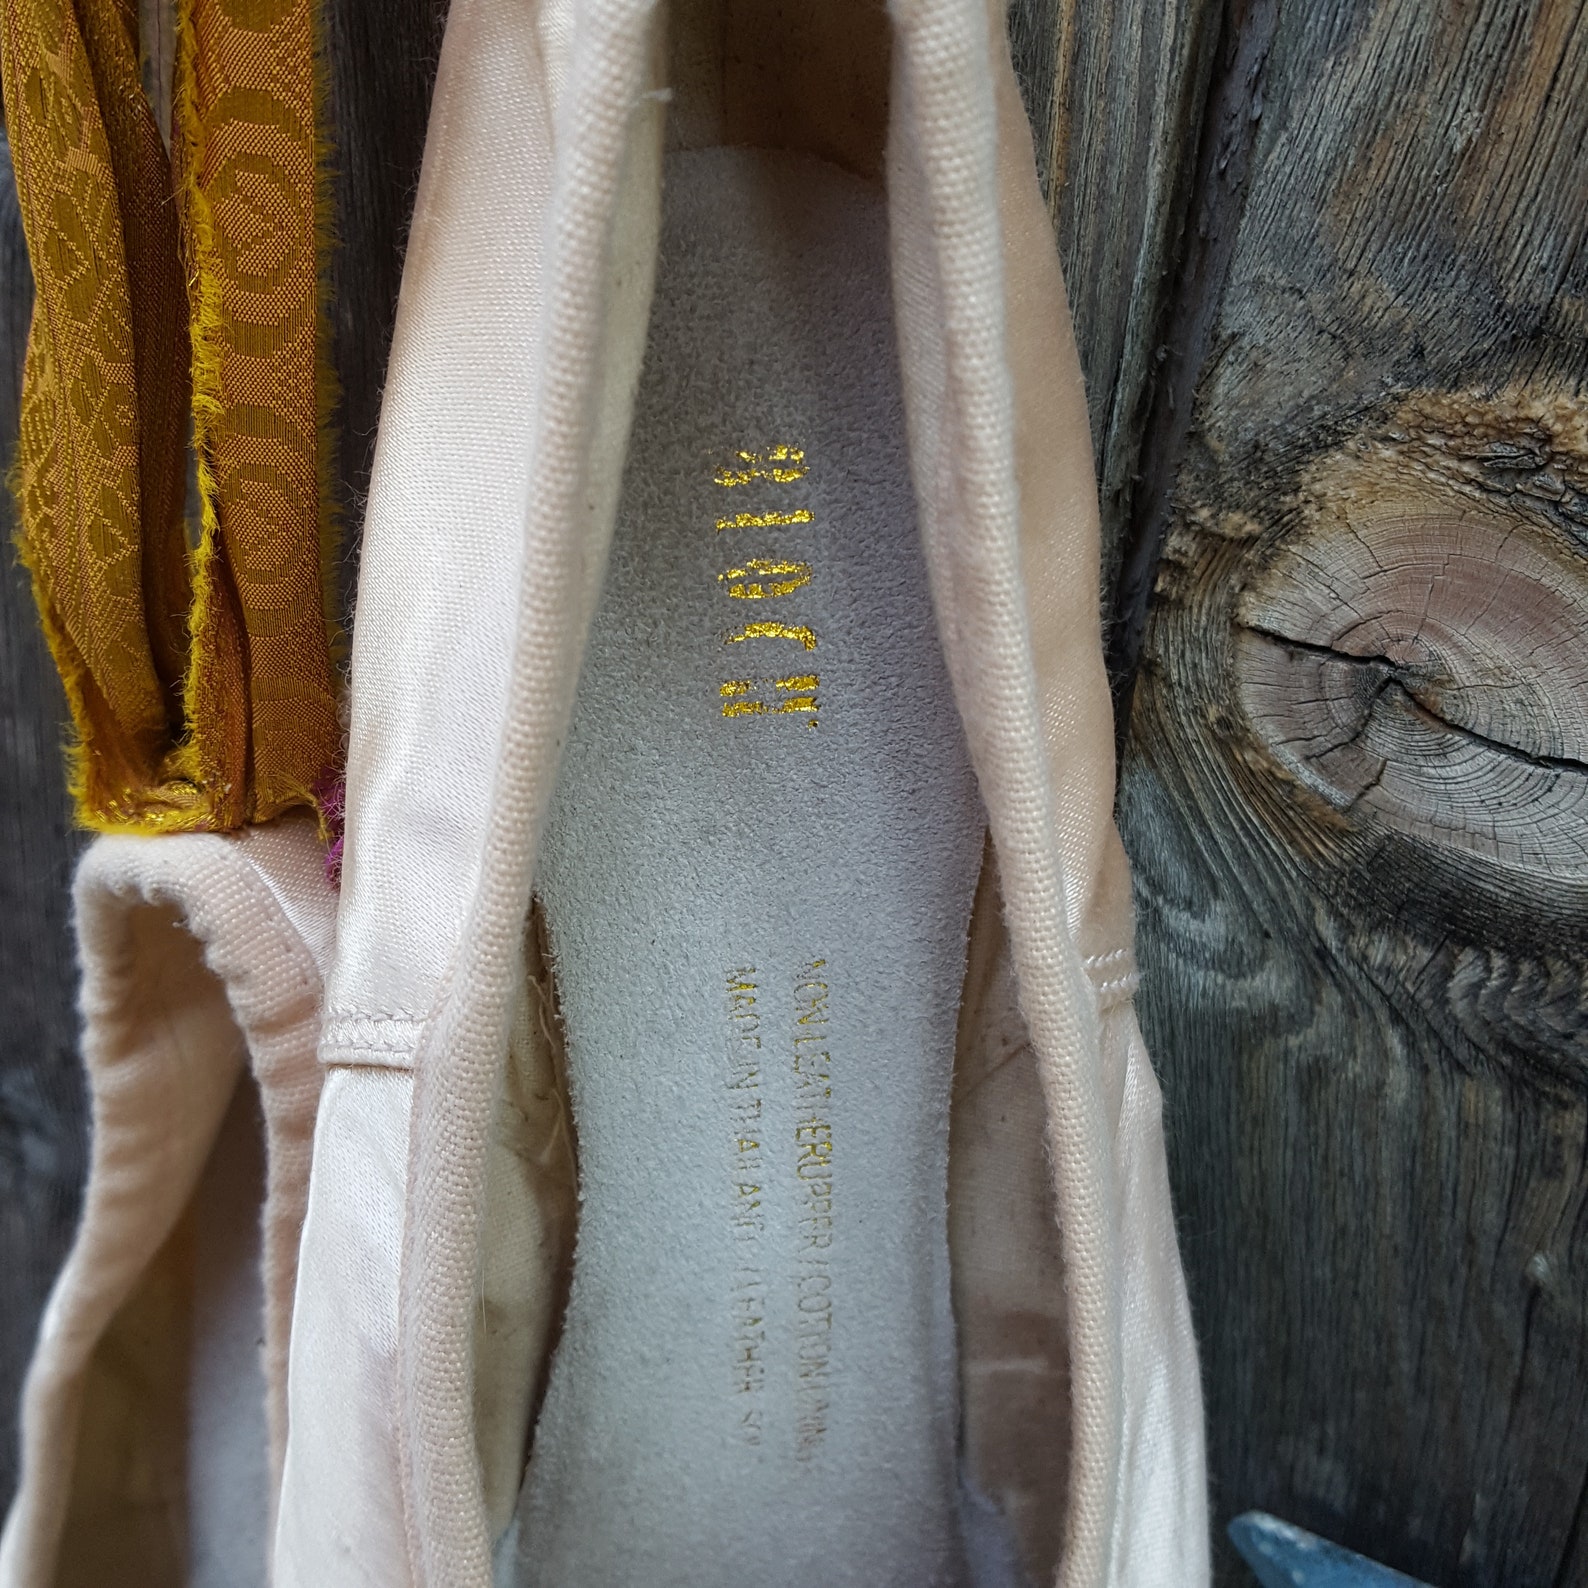 ballet pointe shoes, with petite point